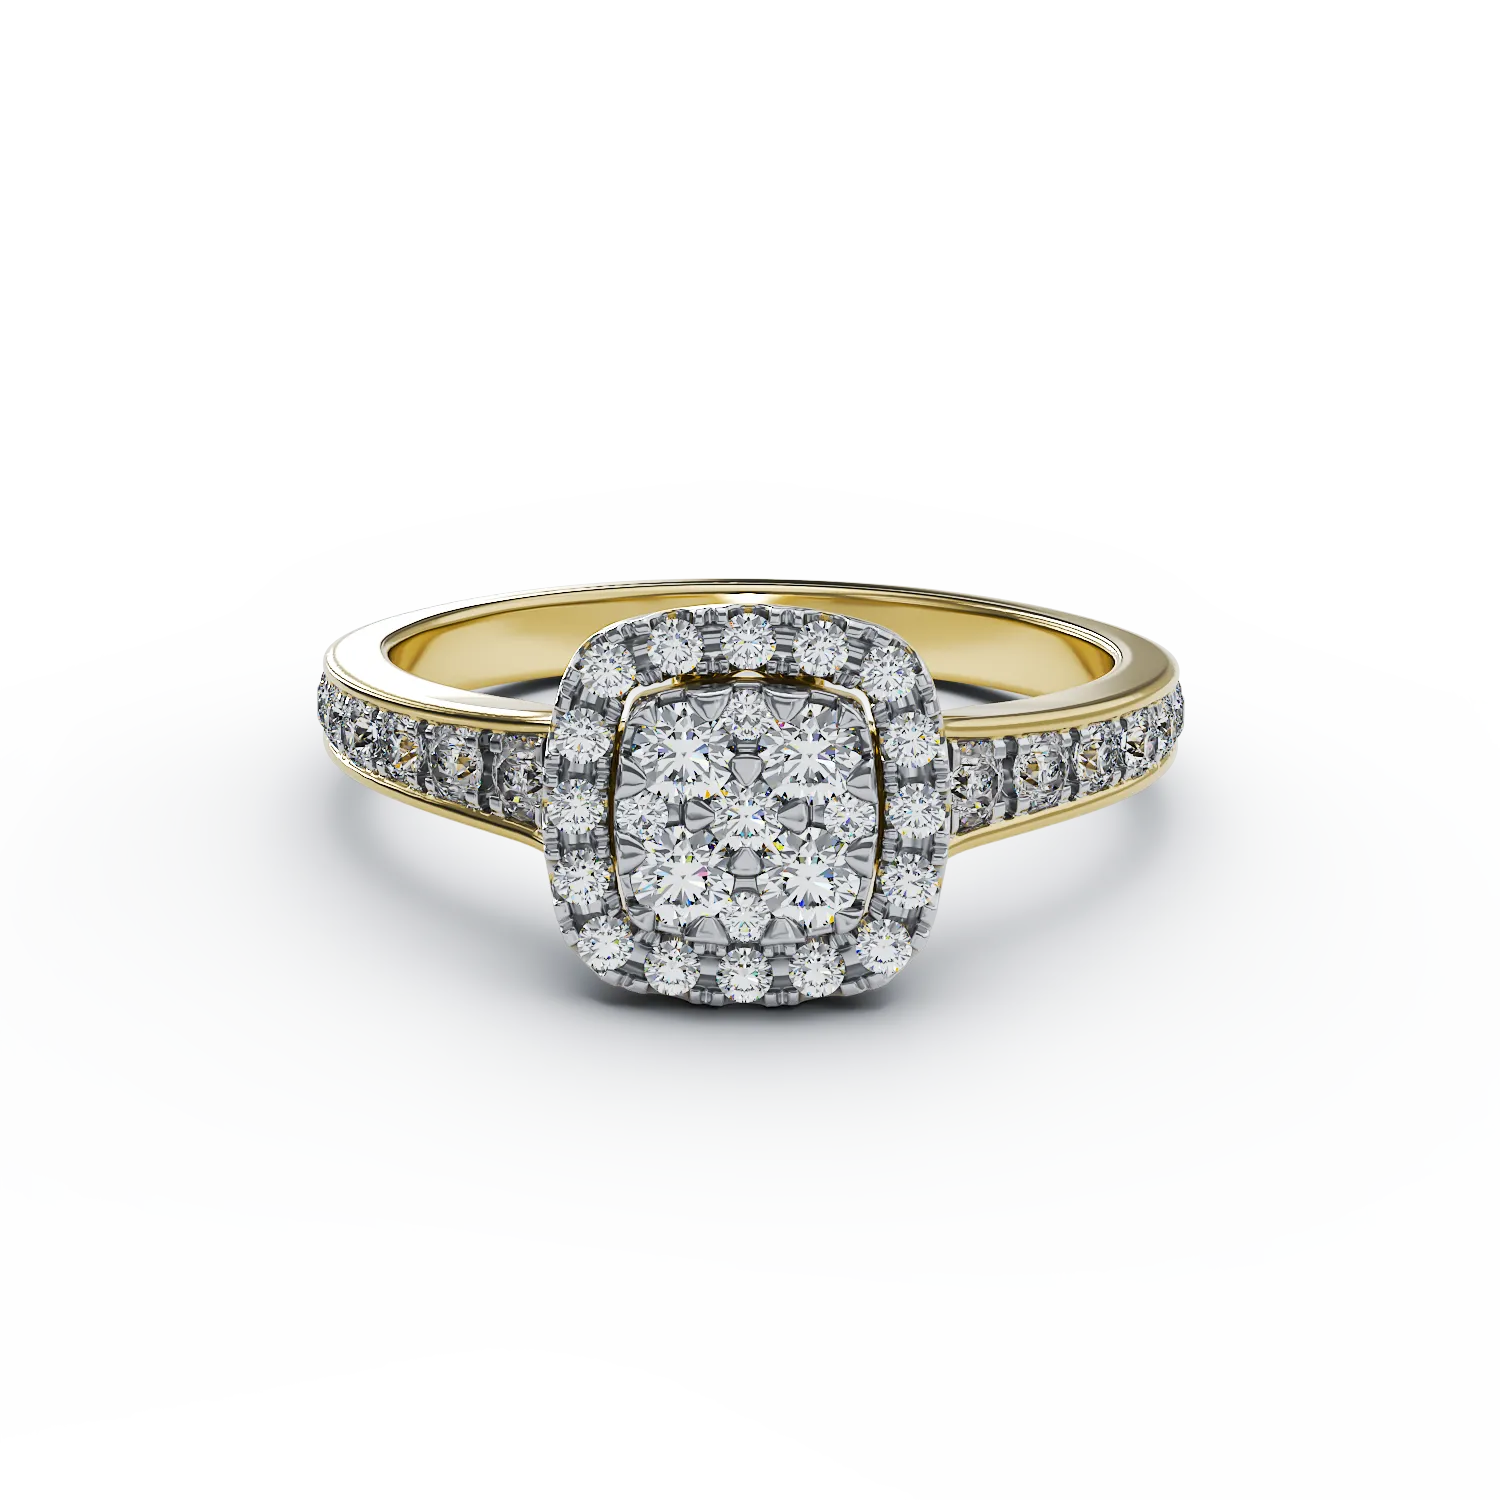 18K yellow gold engagement ring with 0.52ct diamonds